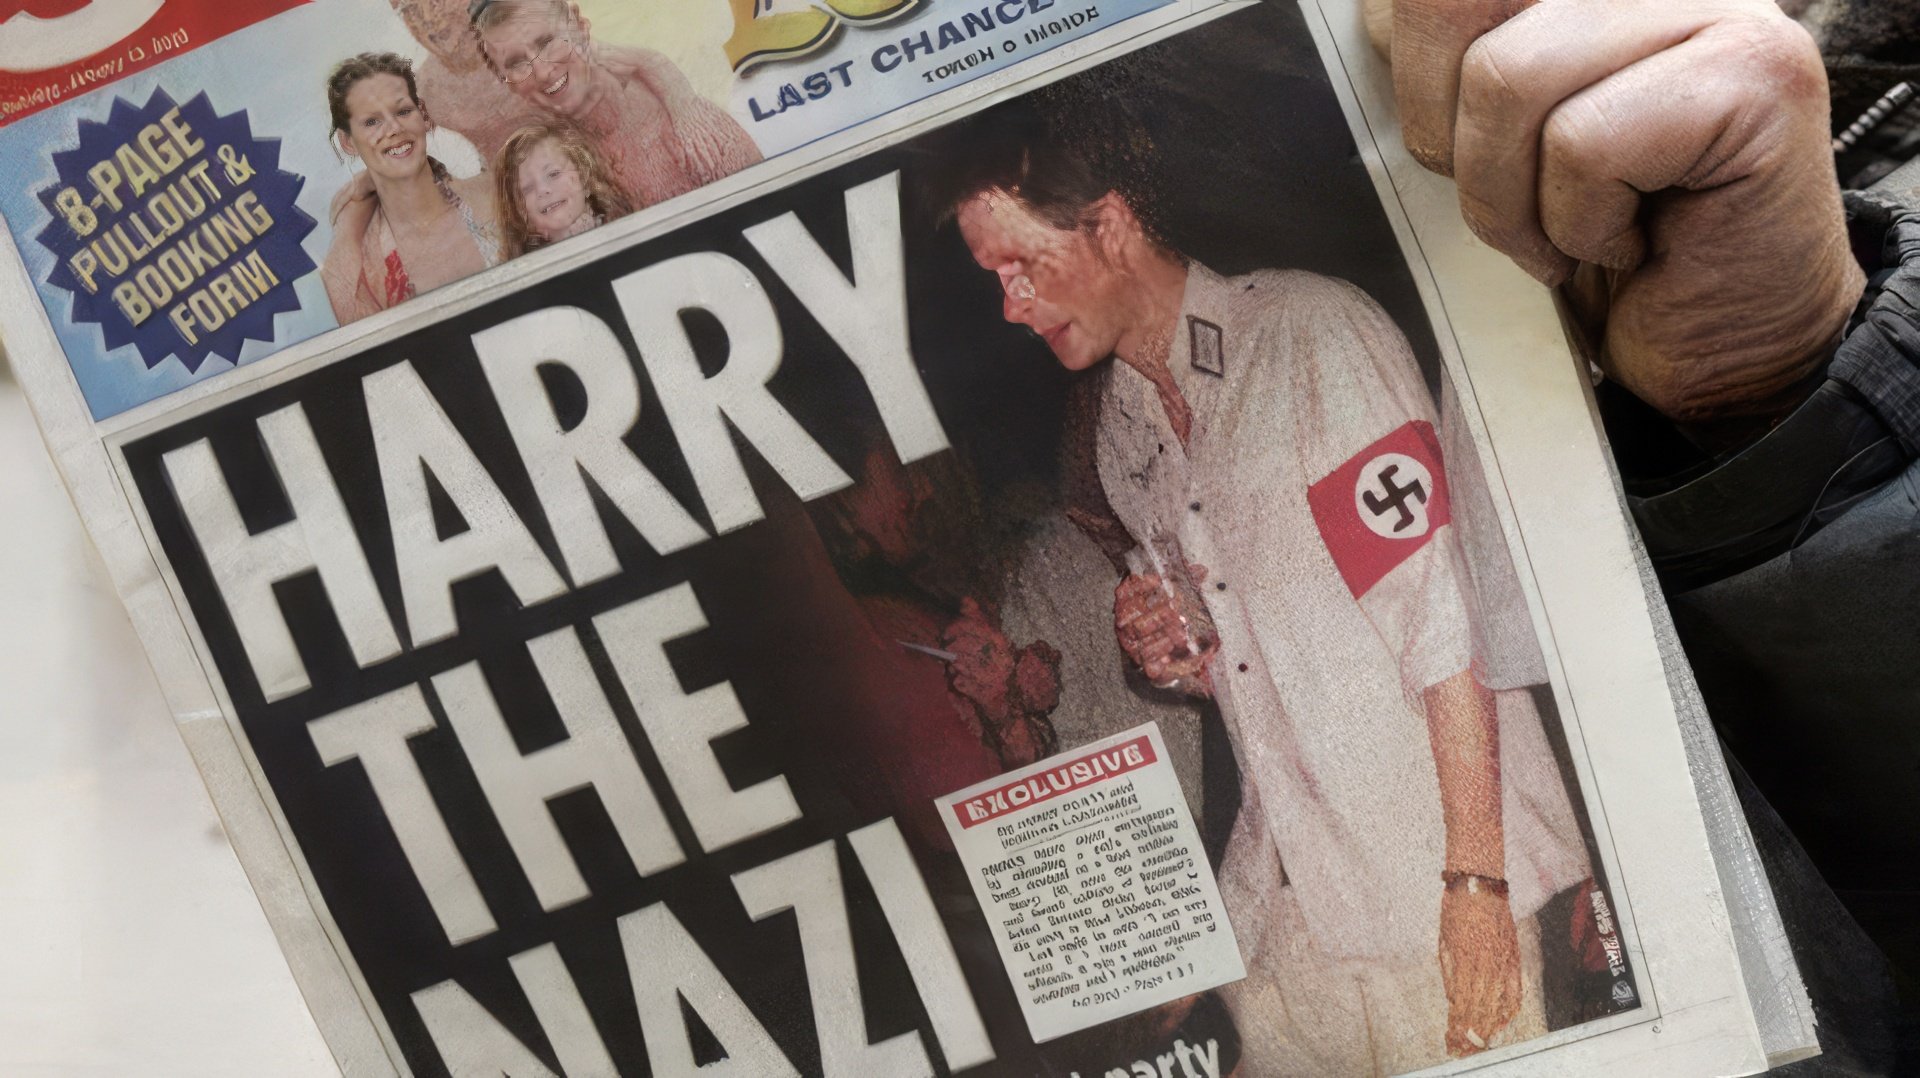 A picture of Prince Harry’s swastika outfit made the papers